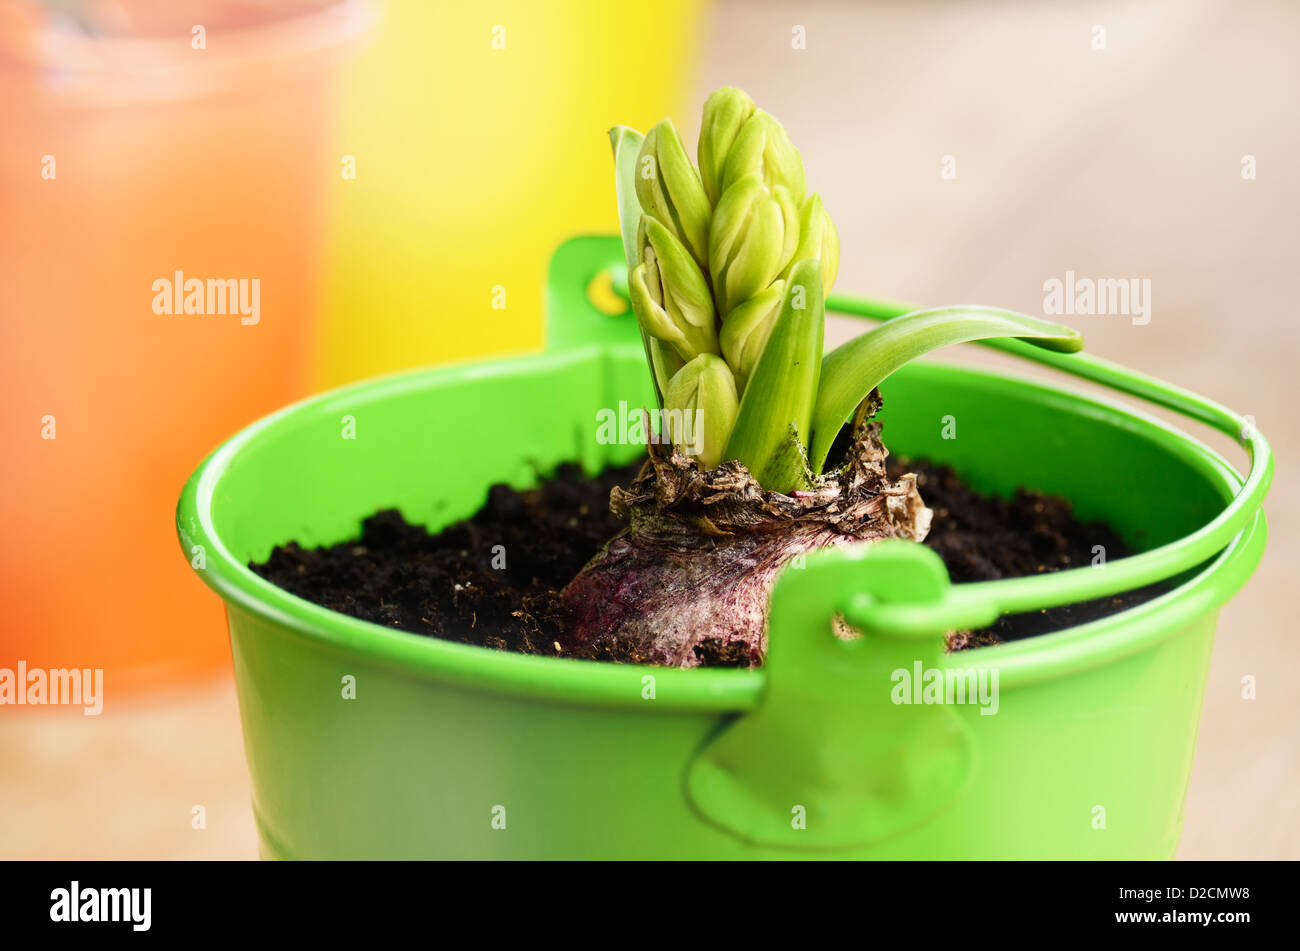 Hyacinth flower bulb in the small green bucket Stock Photo